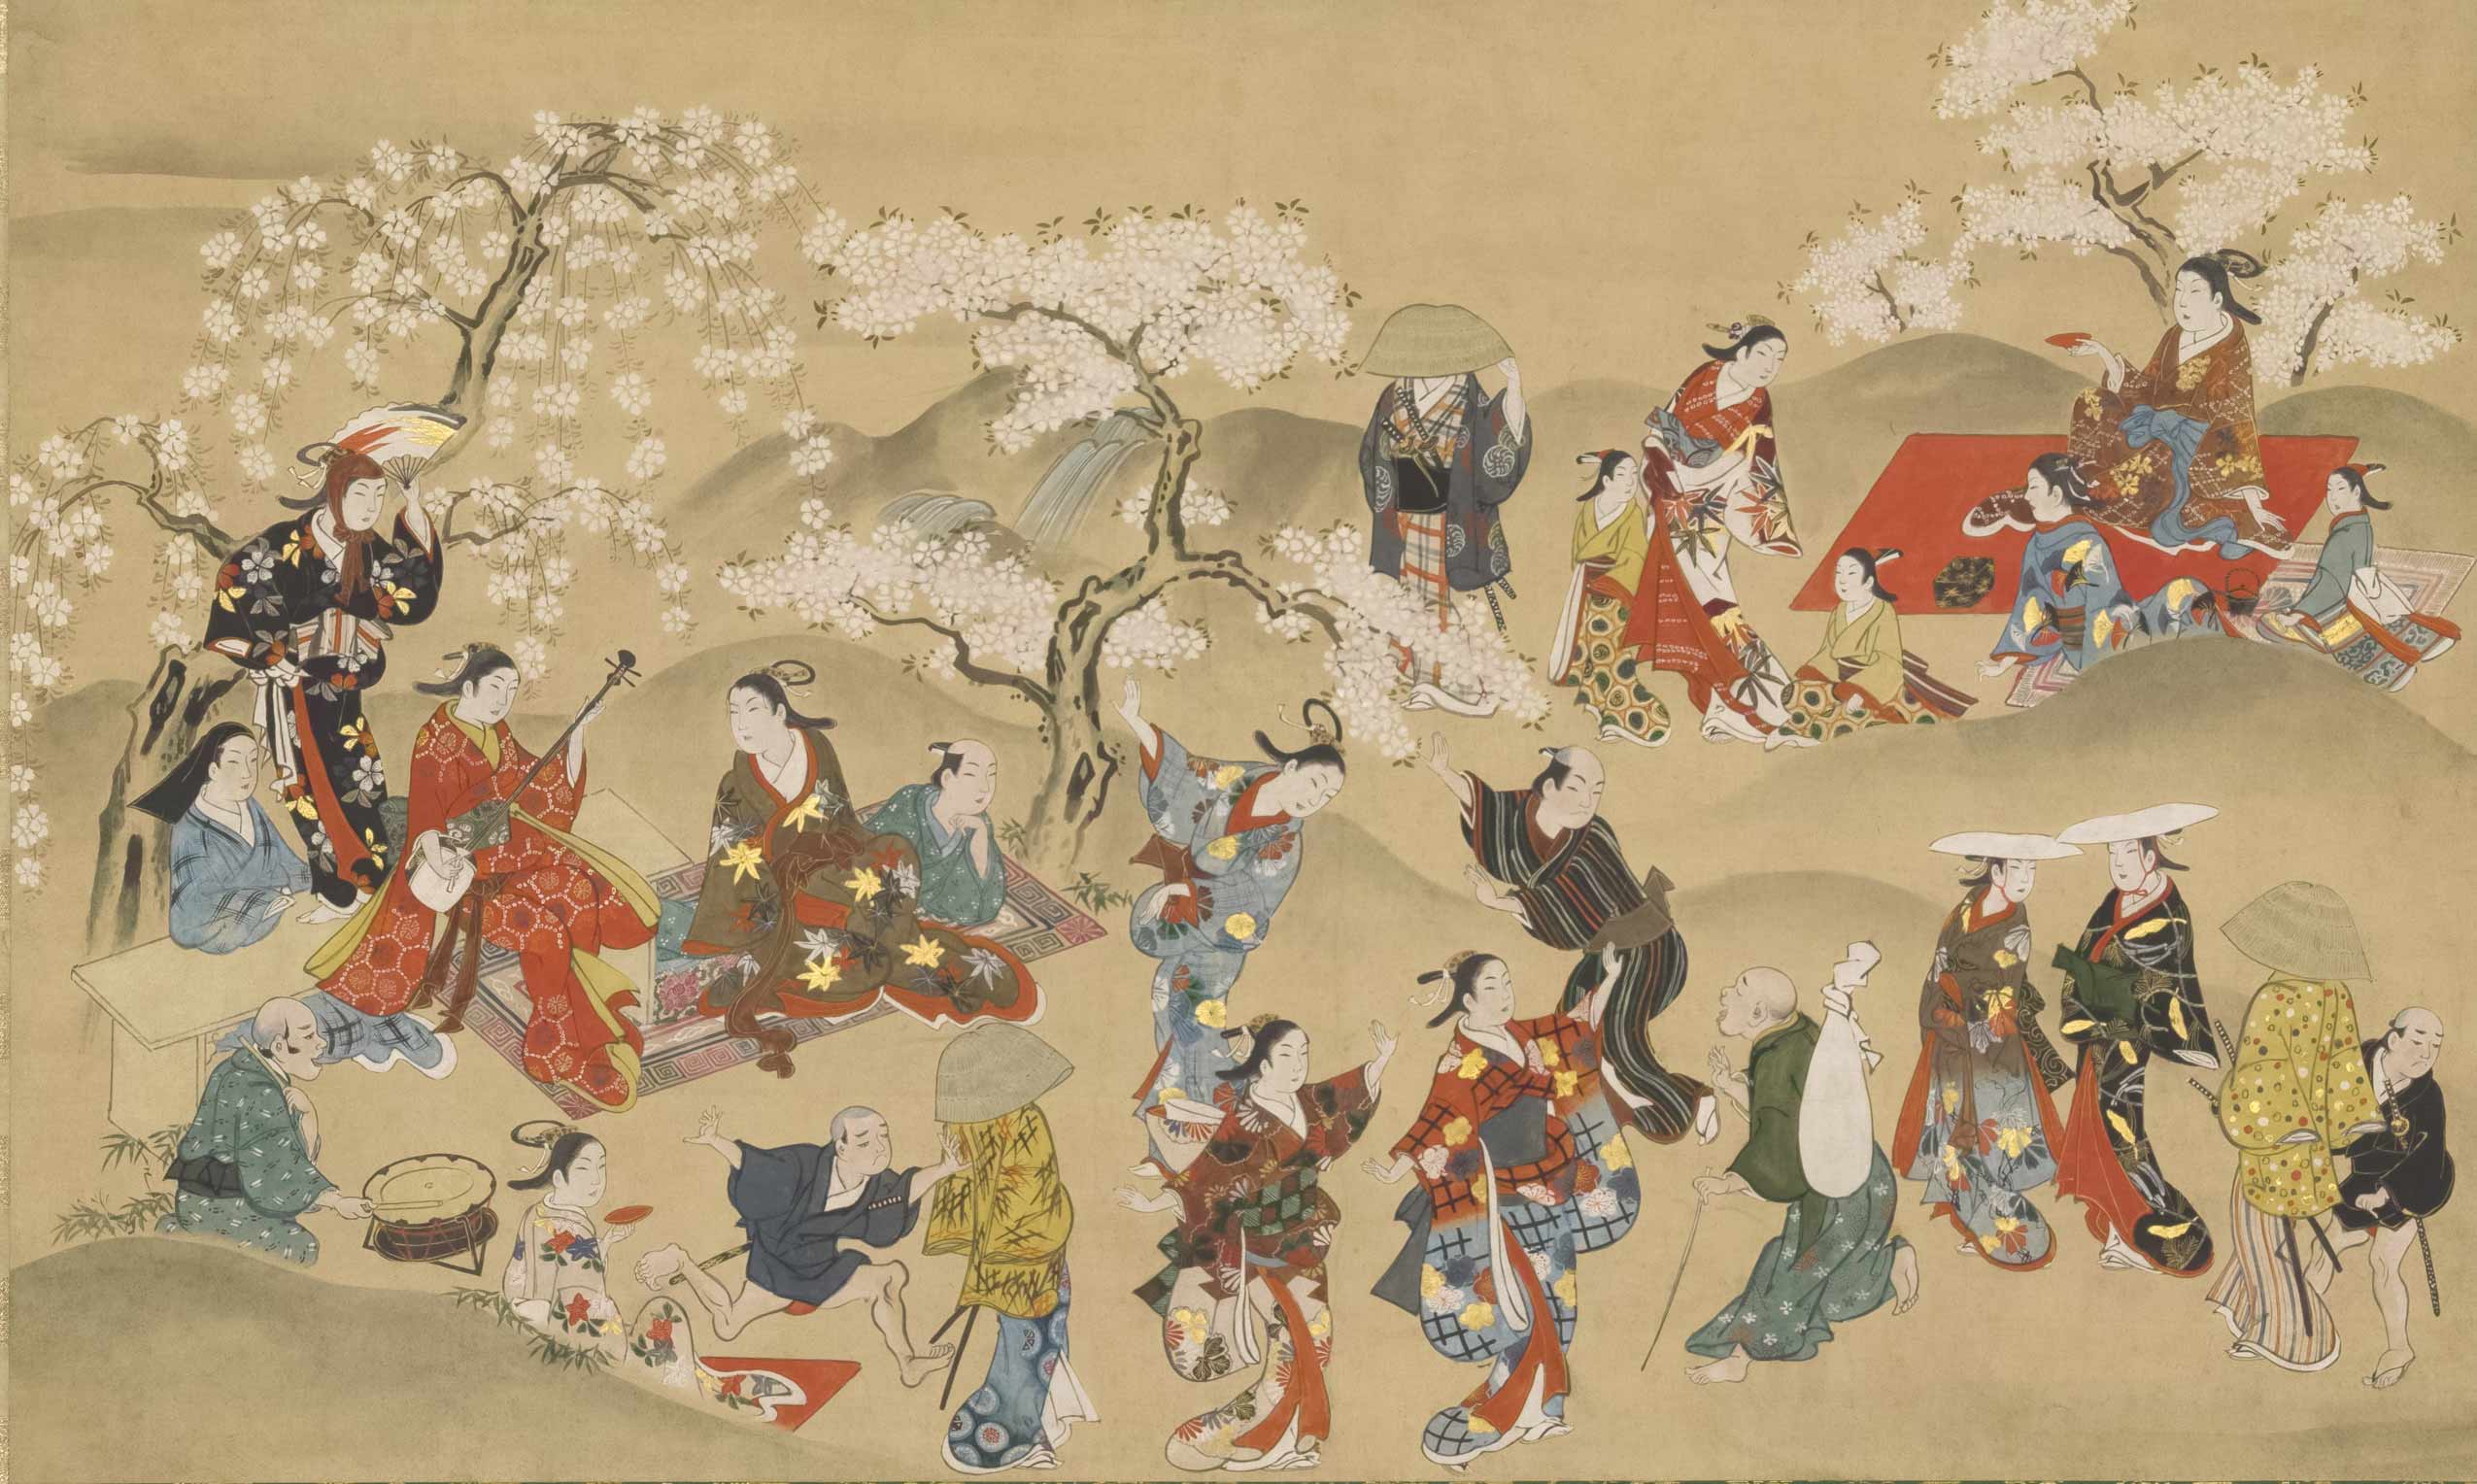 <p><strong>Miyagawa Isshō</strong>, <em>Cherry-blossom Party</em>, circa 1745, Private Collection.</p>
